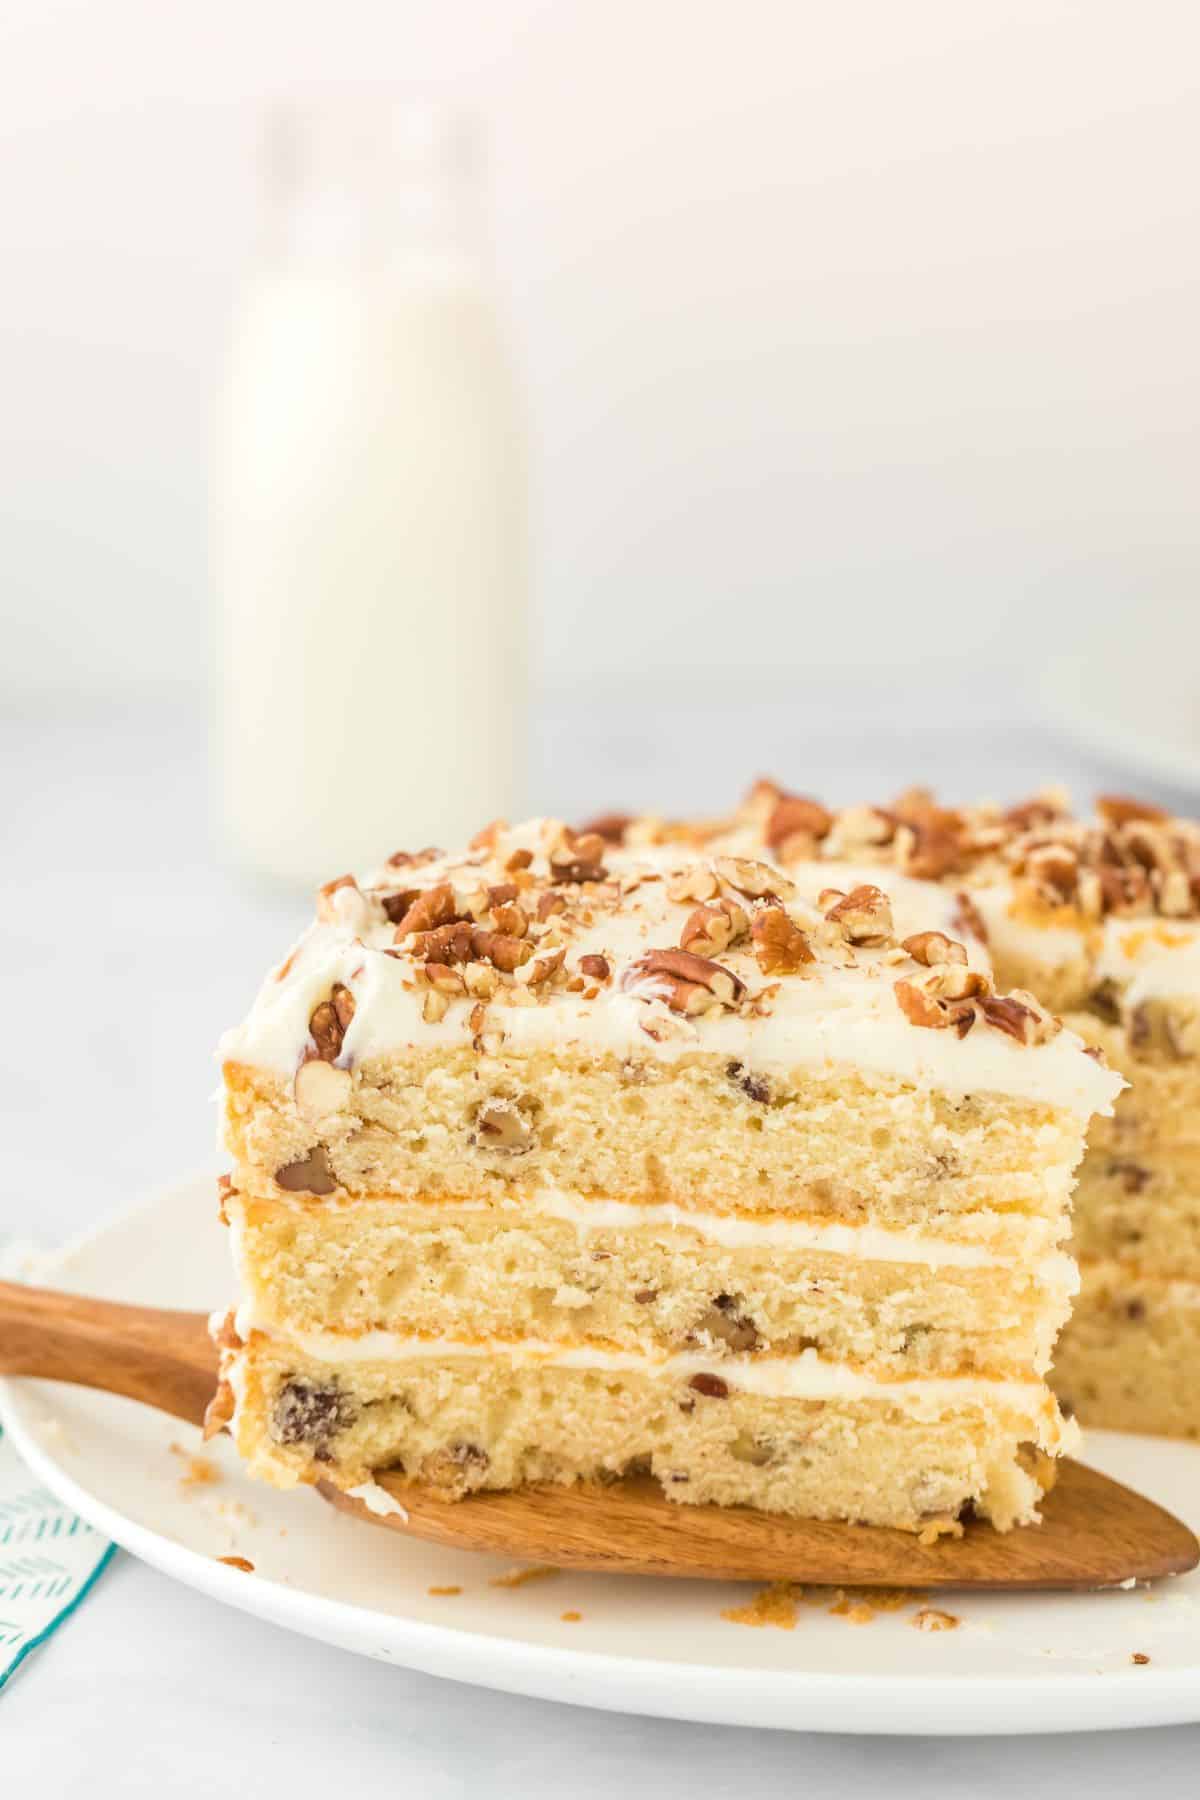 Slice of butter pecan cake on a wooden cake server